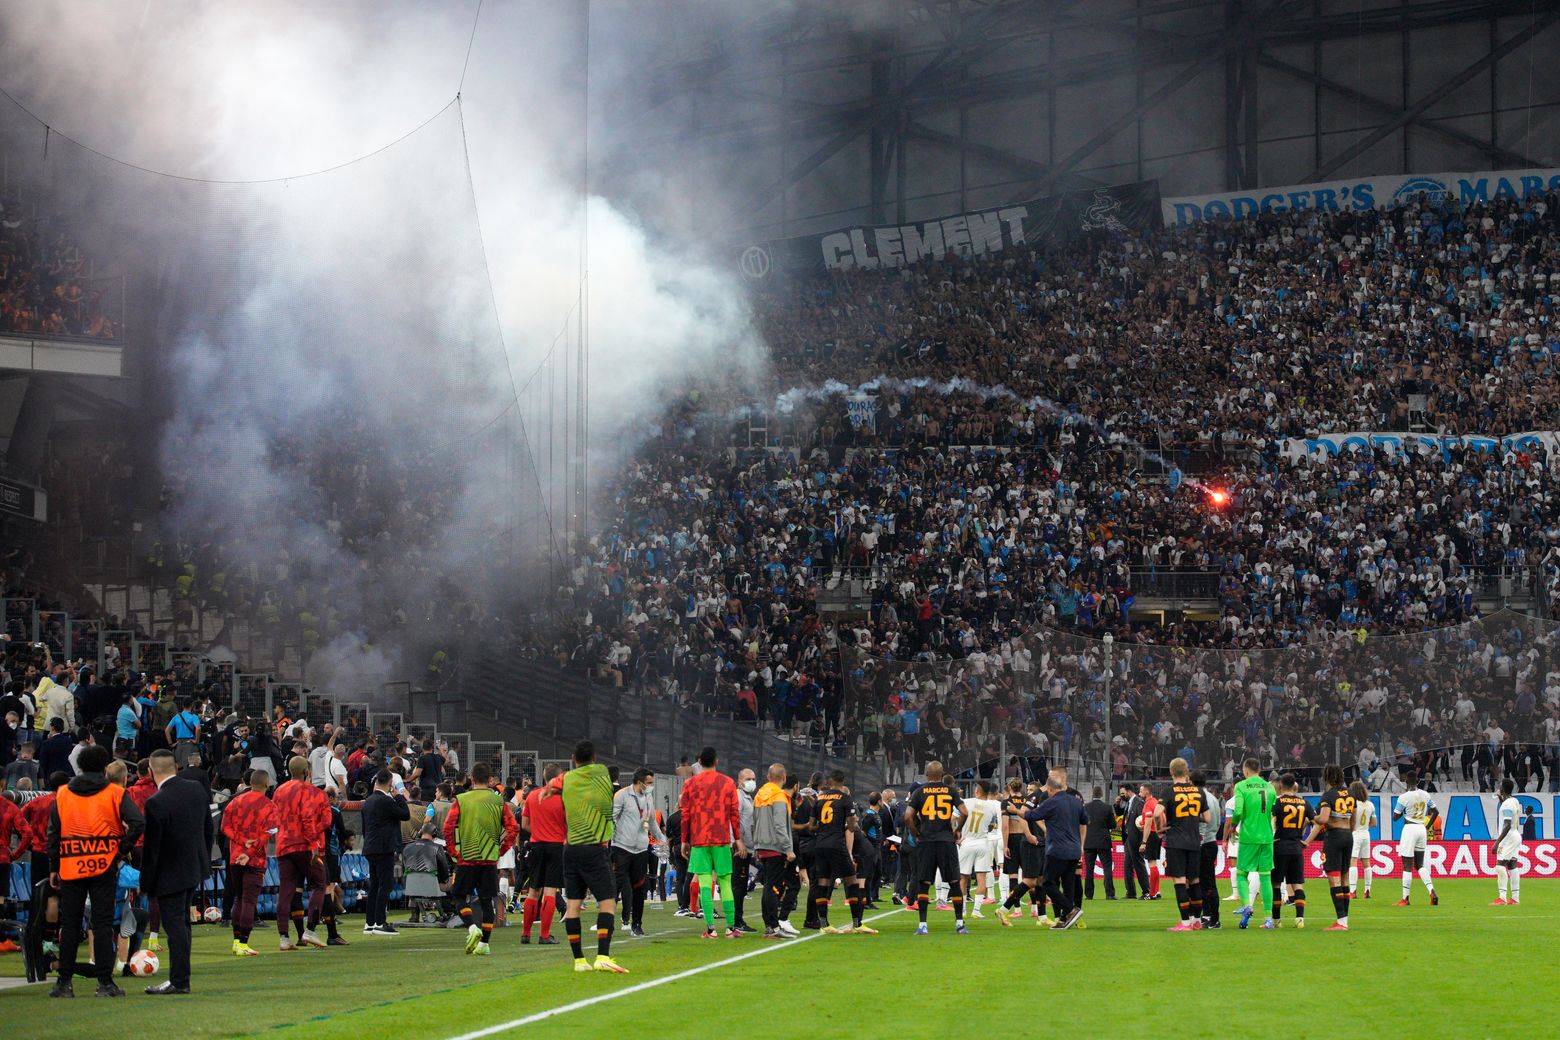 marseille galatasaray match halted after rivals fans clash the seattle times